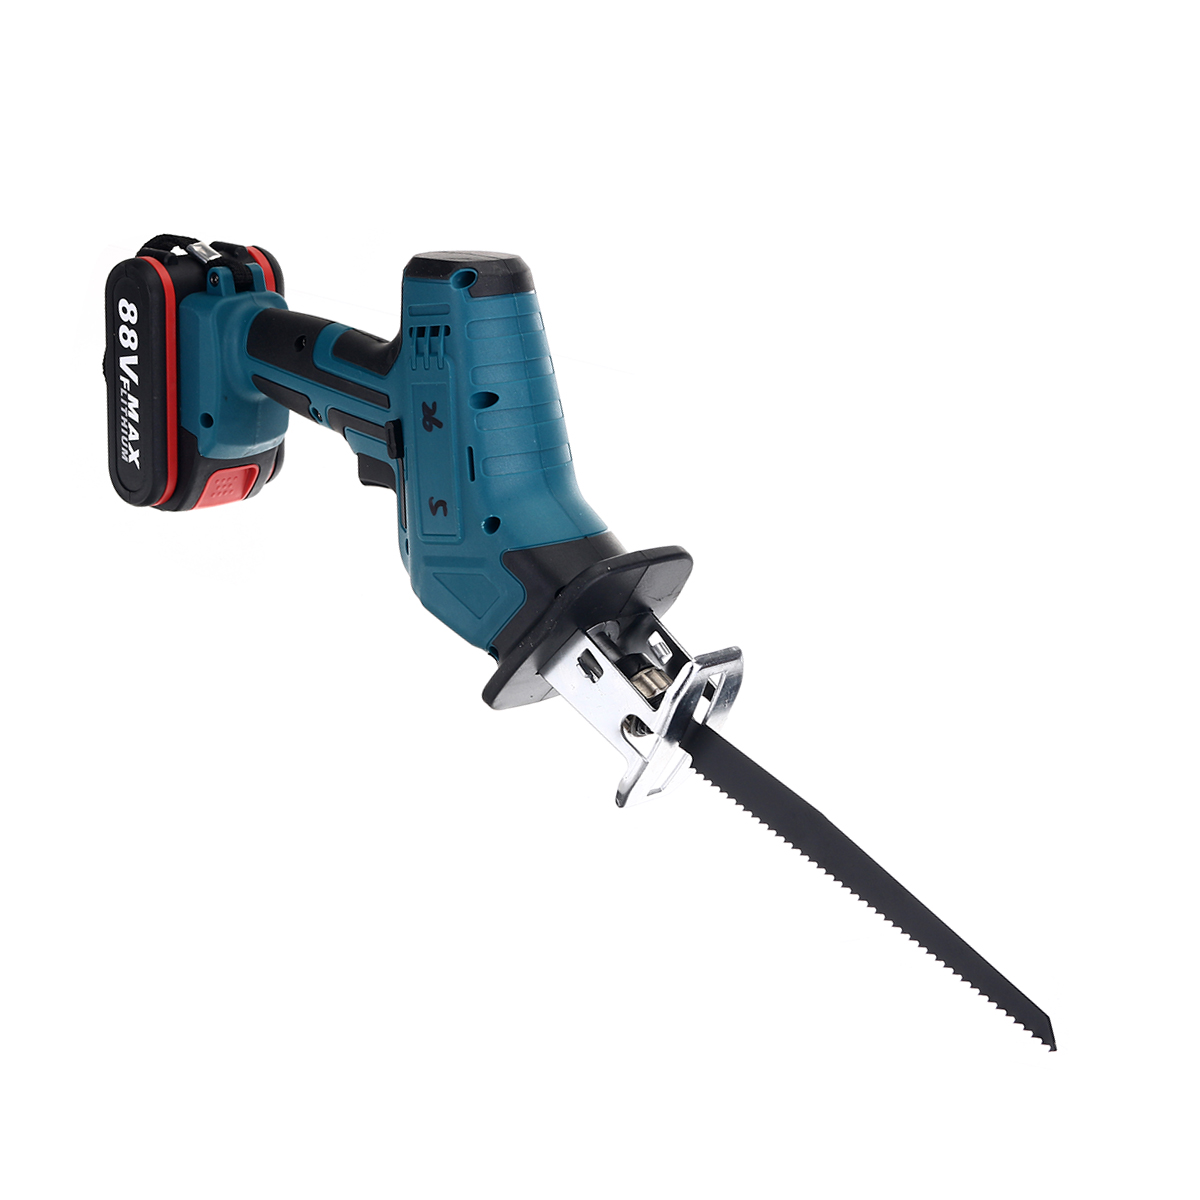 Cordless-Reciprocating-Saw-With-4-Blades-Rechargeable-Electric-Saw-for-Sawing-Branches-Metal-PVC-Woo-1684064-4